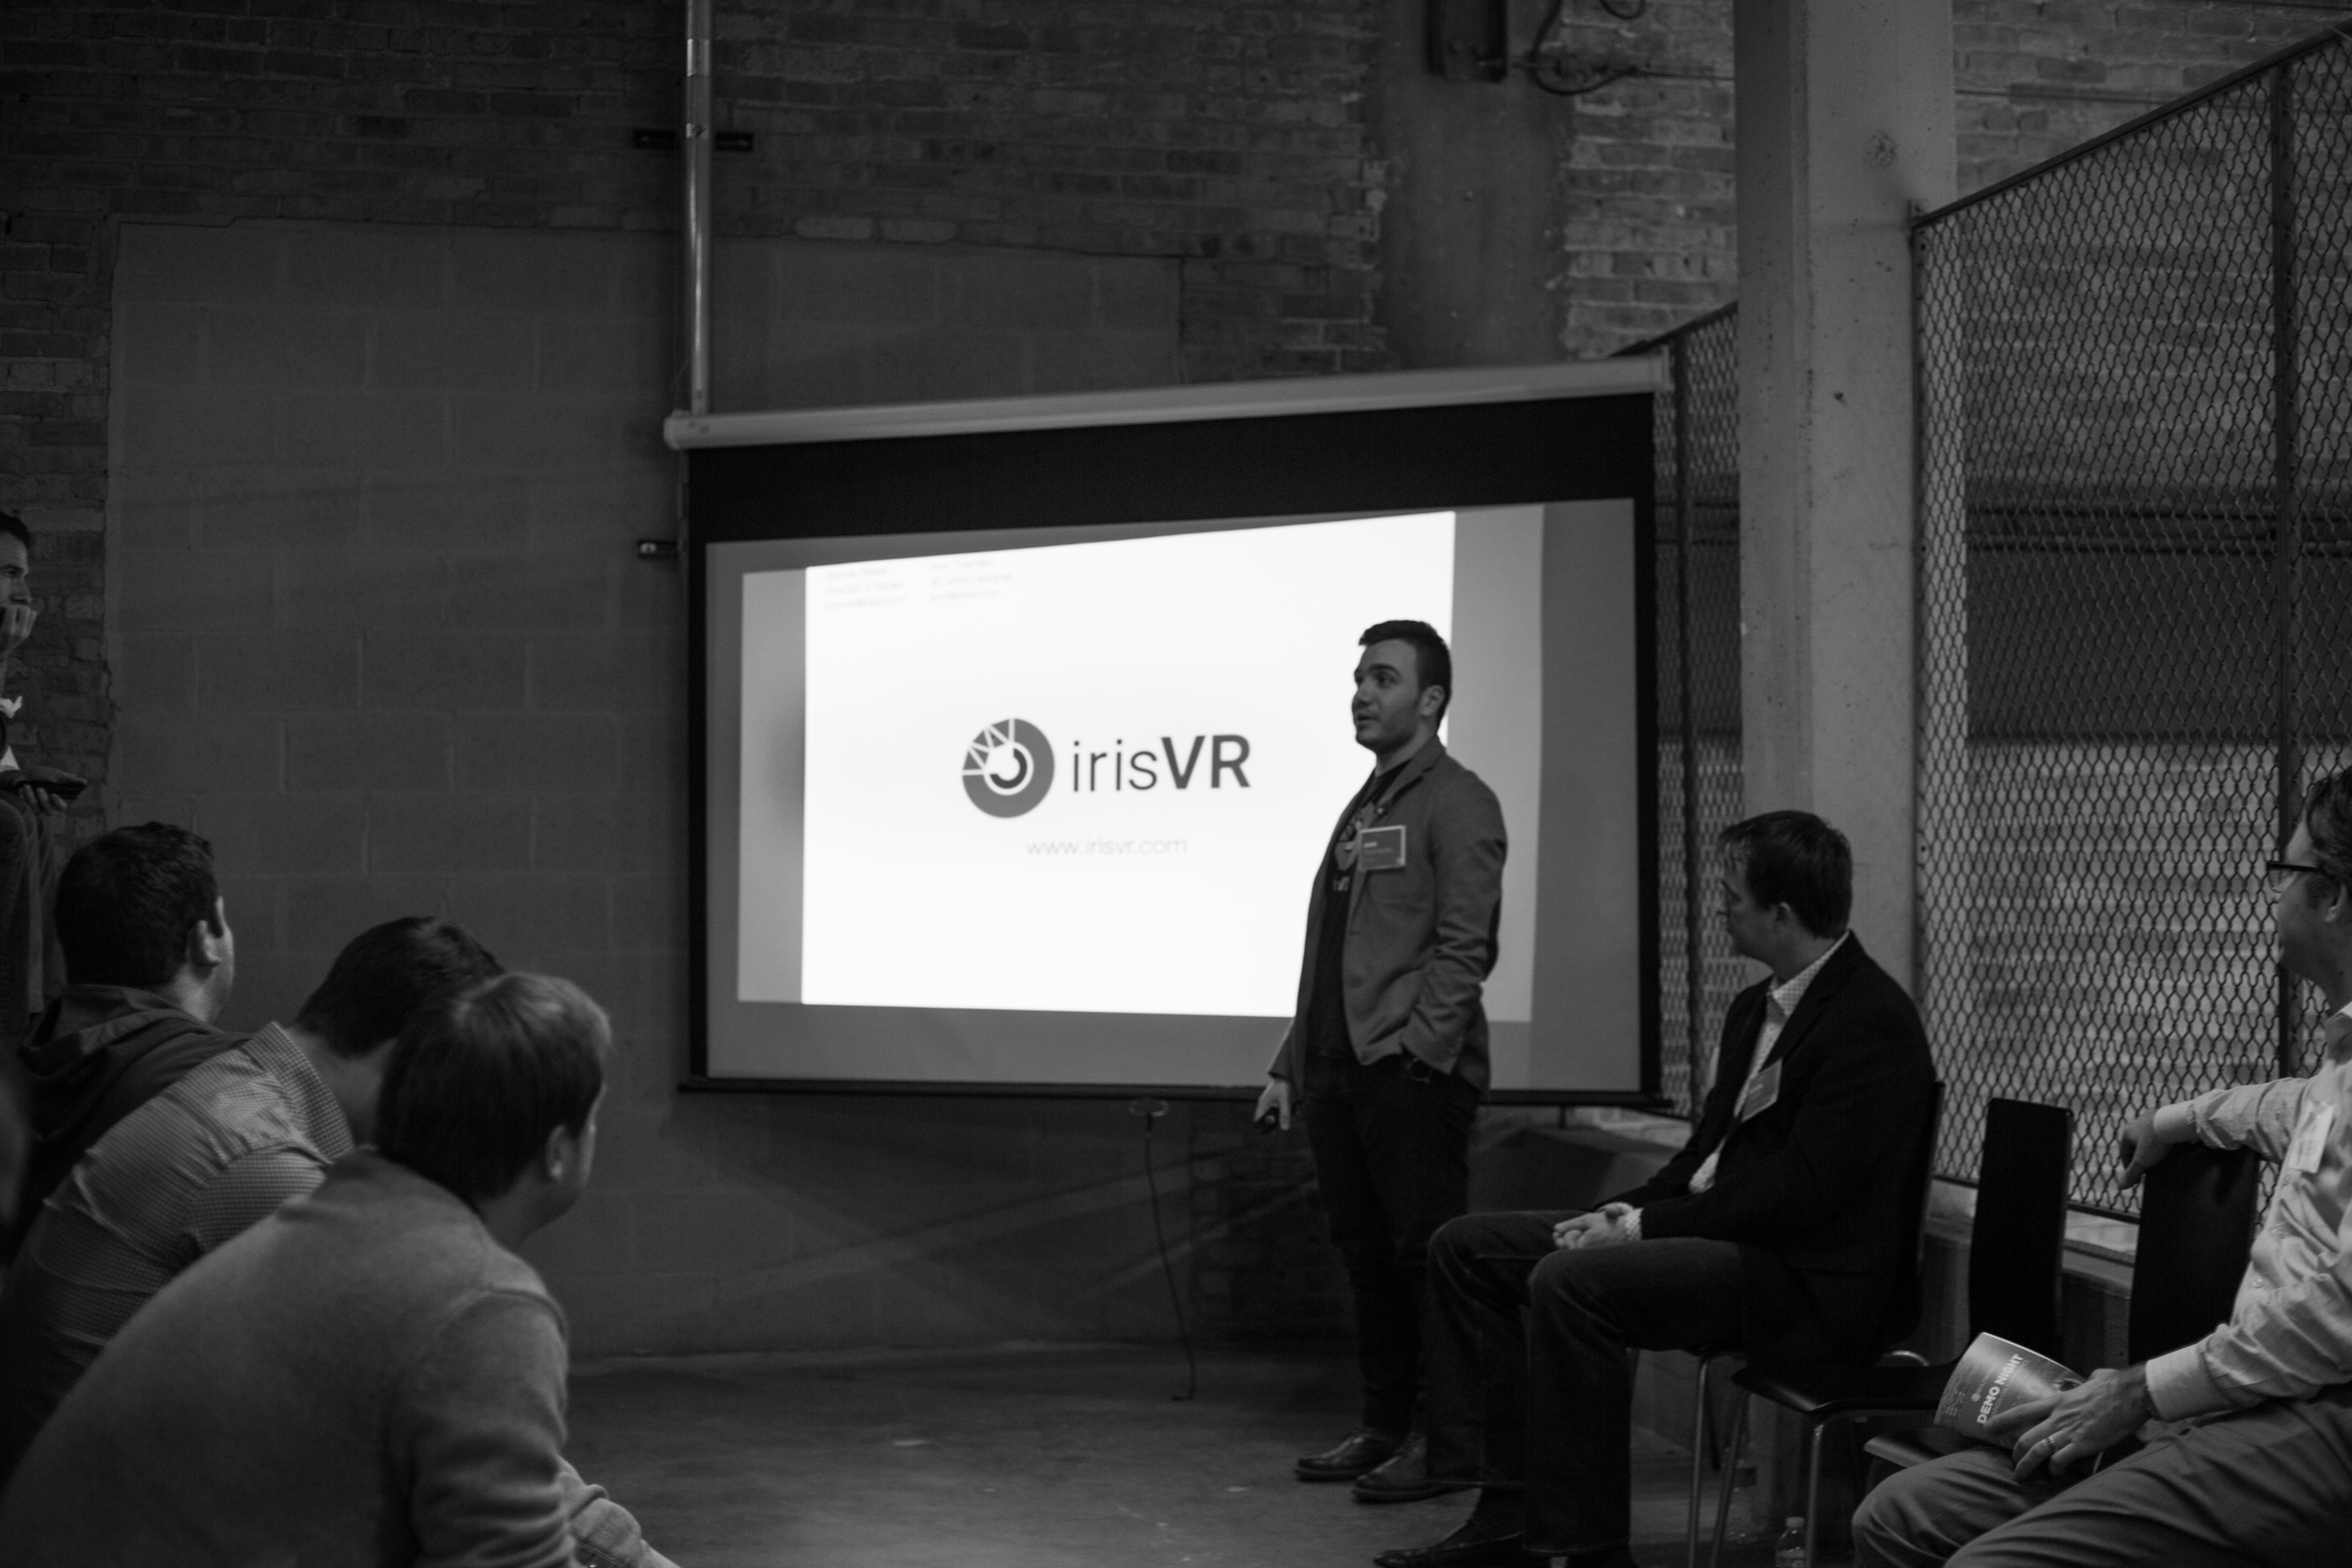  Amr Thameen, 3D specialist with IrisVR, spoke about his firm's visionary work with BIM and Oculus Rift.&nbsp; 